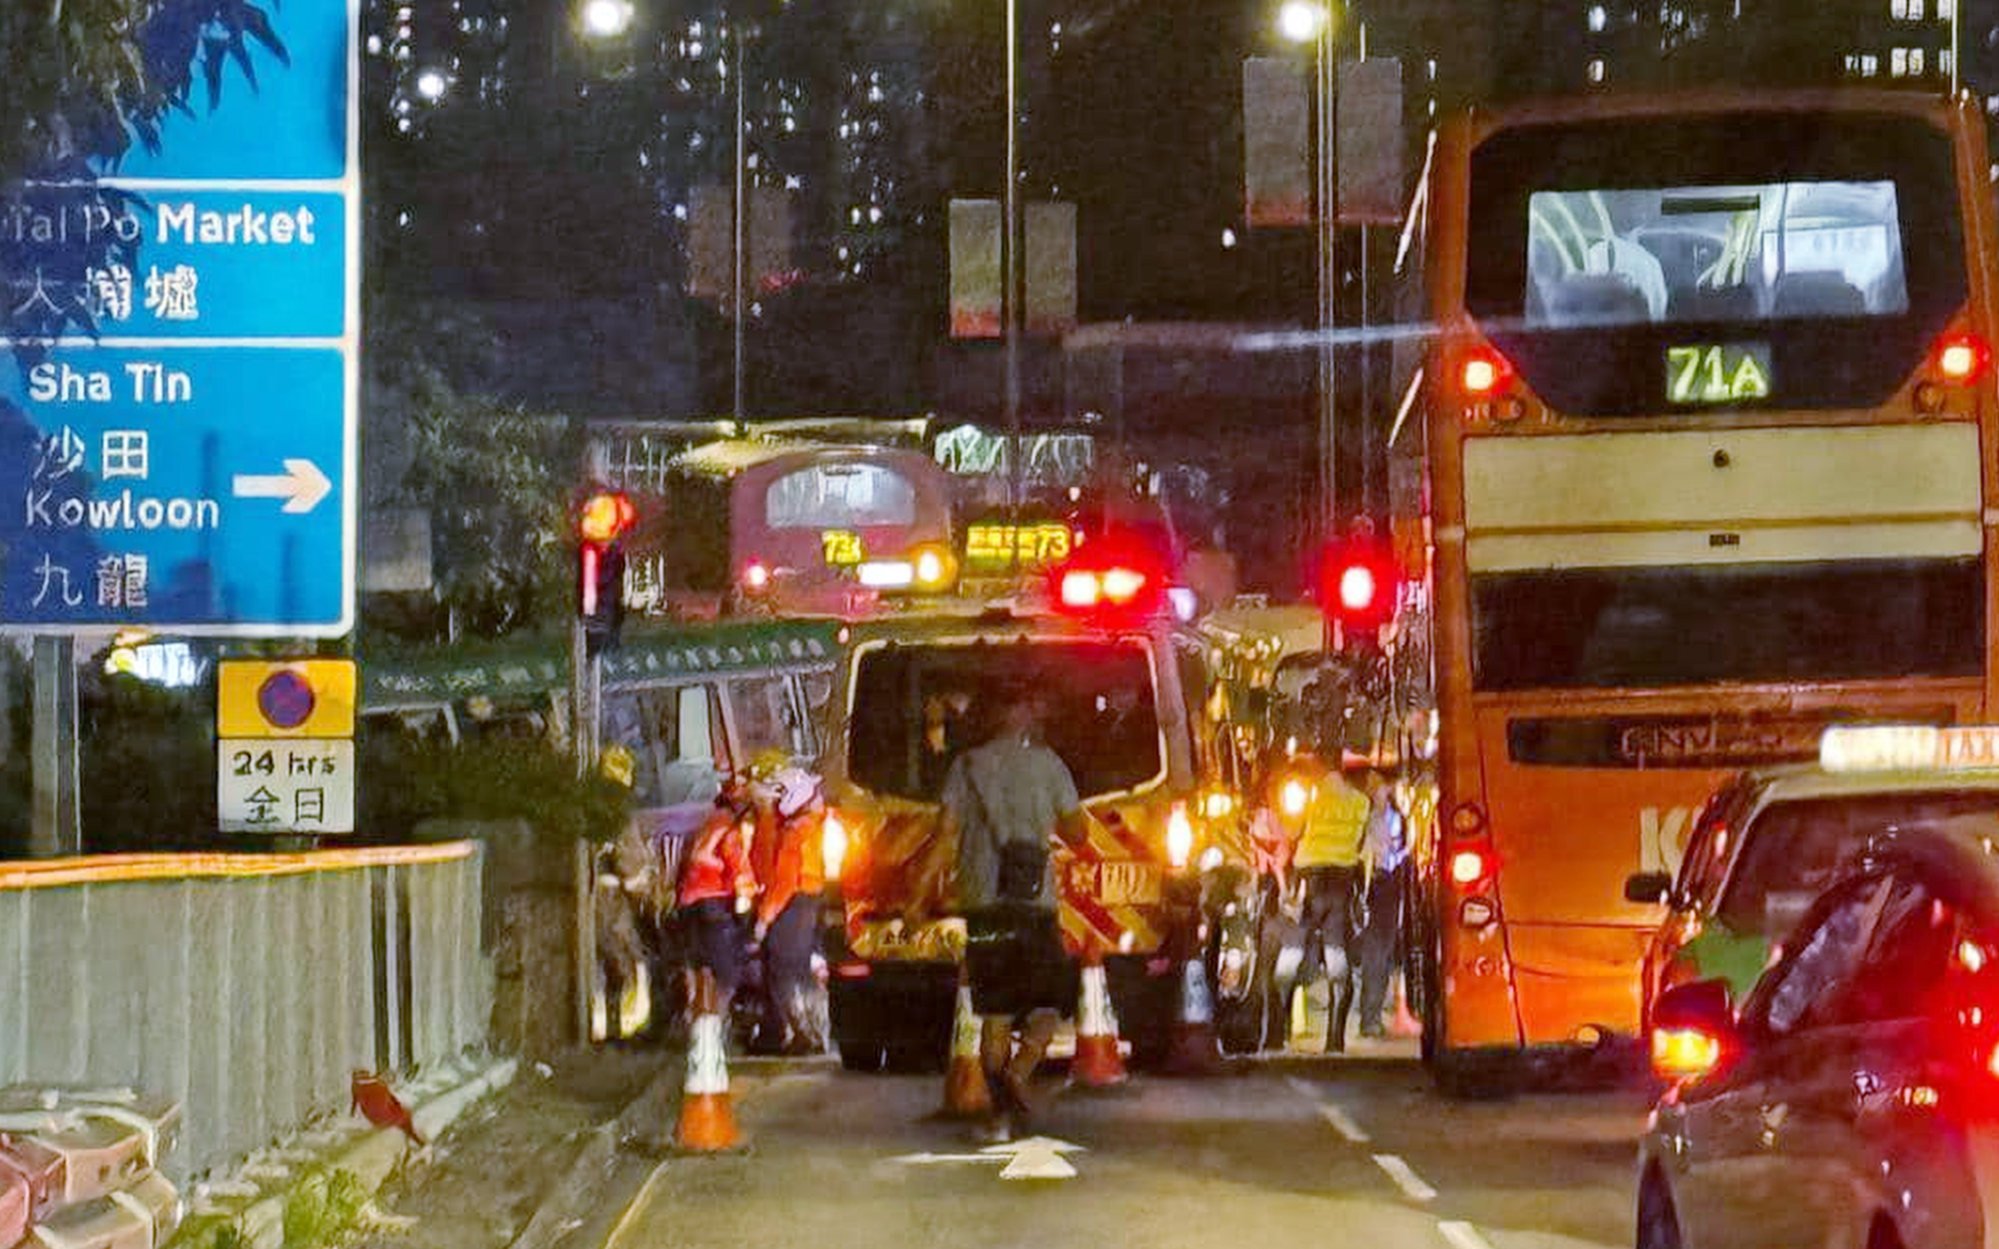 hong kong police investigate crash involving minibus driver, 73, who died after vehicle slammed into wall